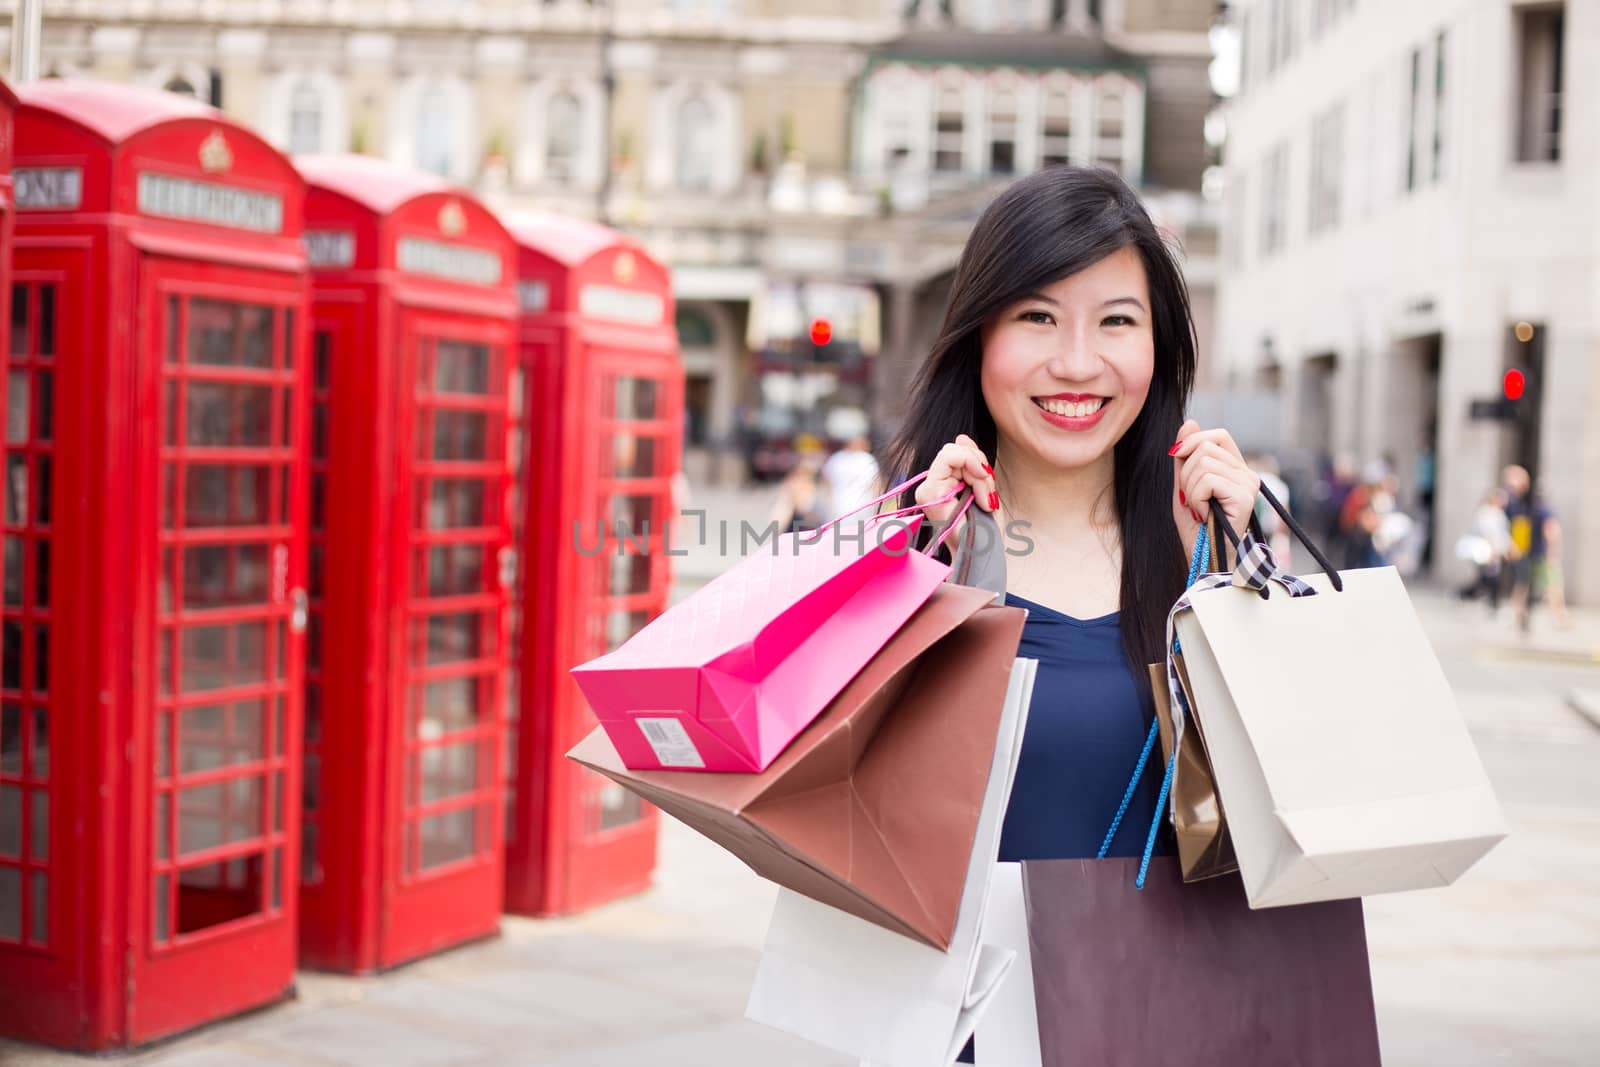 Japanese woman in London shopping